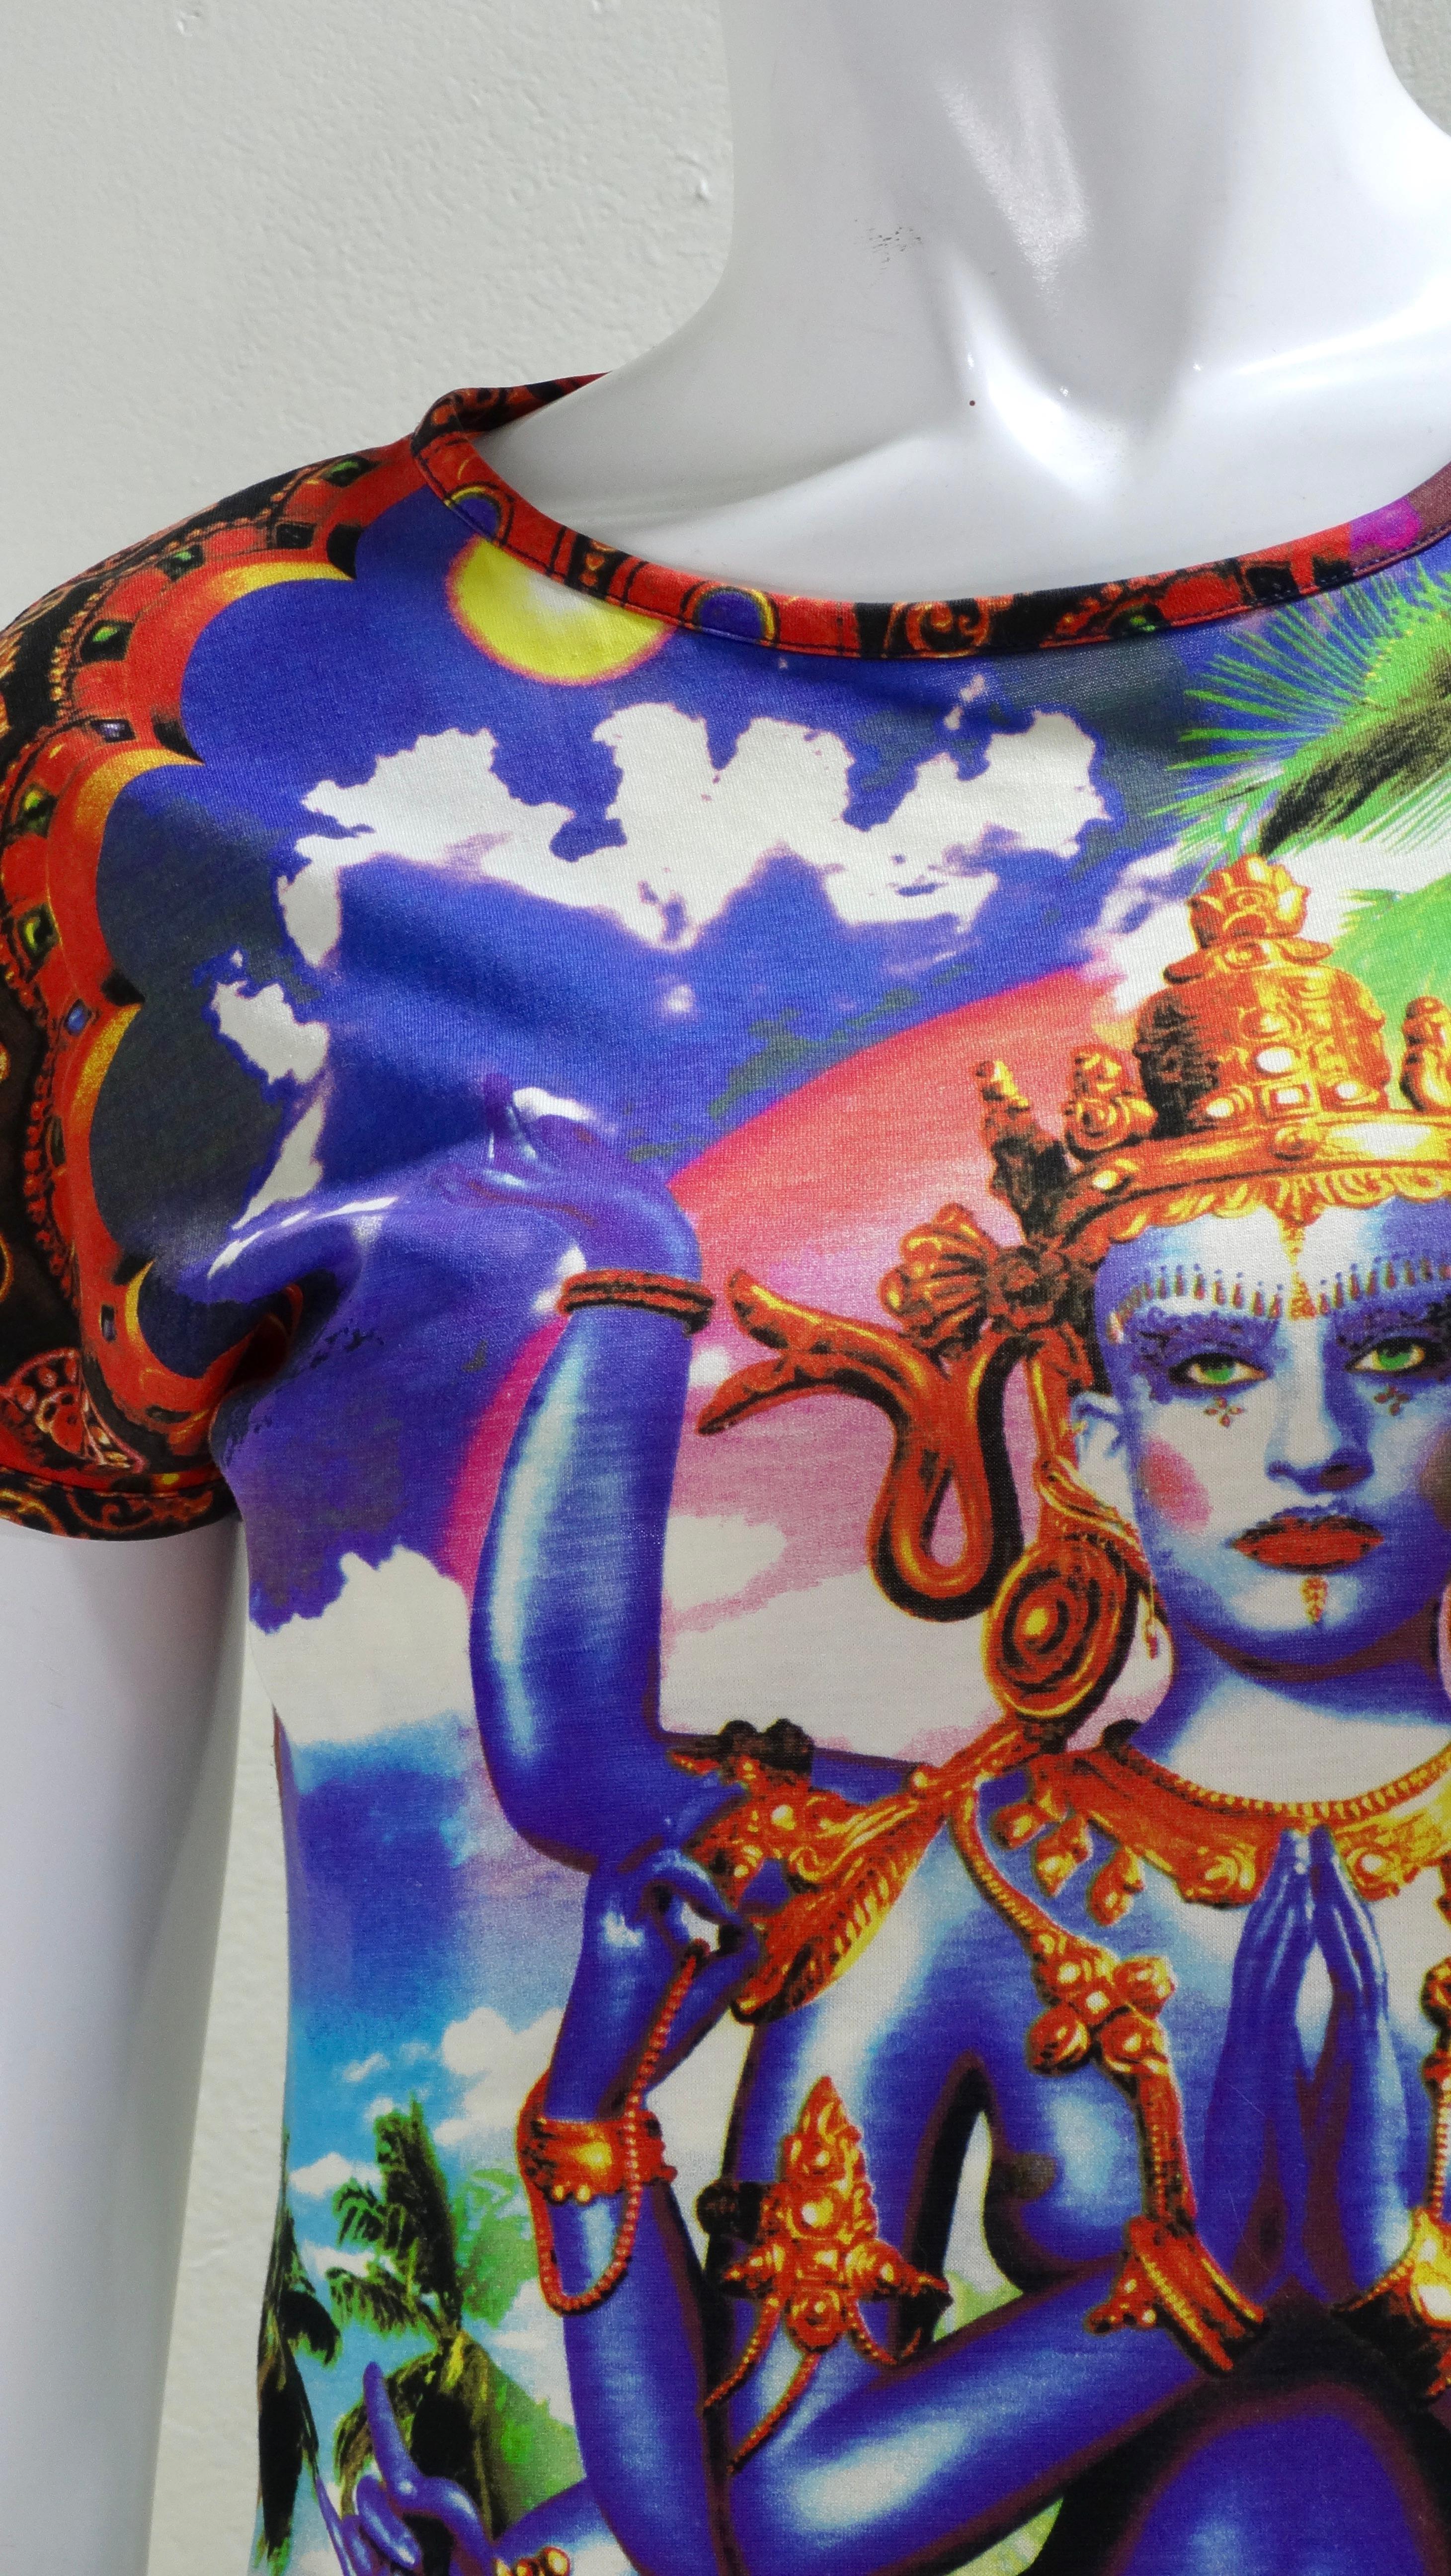 Gaultier lovers, this is just for you! This top shows Gaultier’s long running fascination with extravagant prints and use of stretchy malleable material. This top features a vibrant neon Hindu God print in a slightly cropped fit and a t-shirt